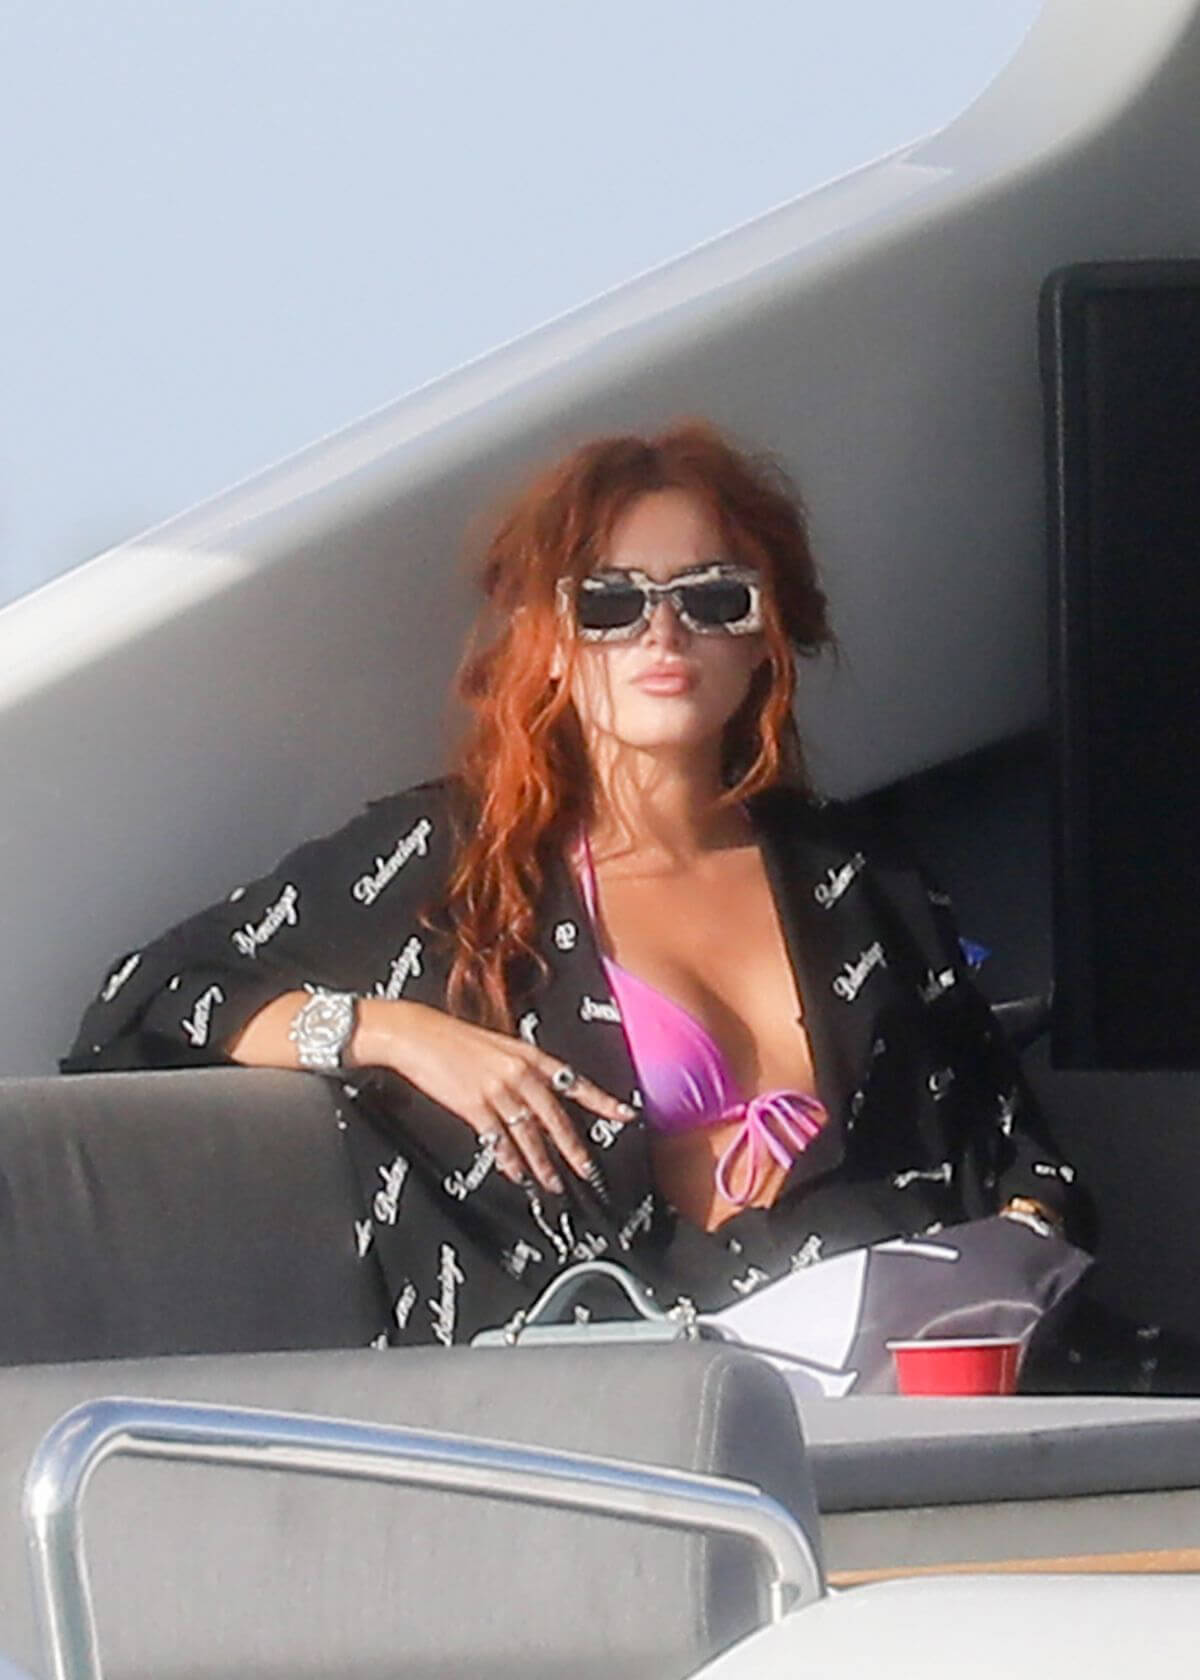 Bella Thorne Flashes Her Cleavage in Violet Bikini as She Enjoys at a Boat in Miami Beach 03/11/2021